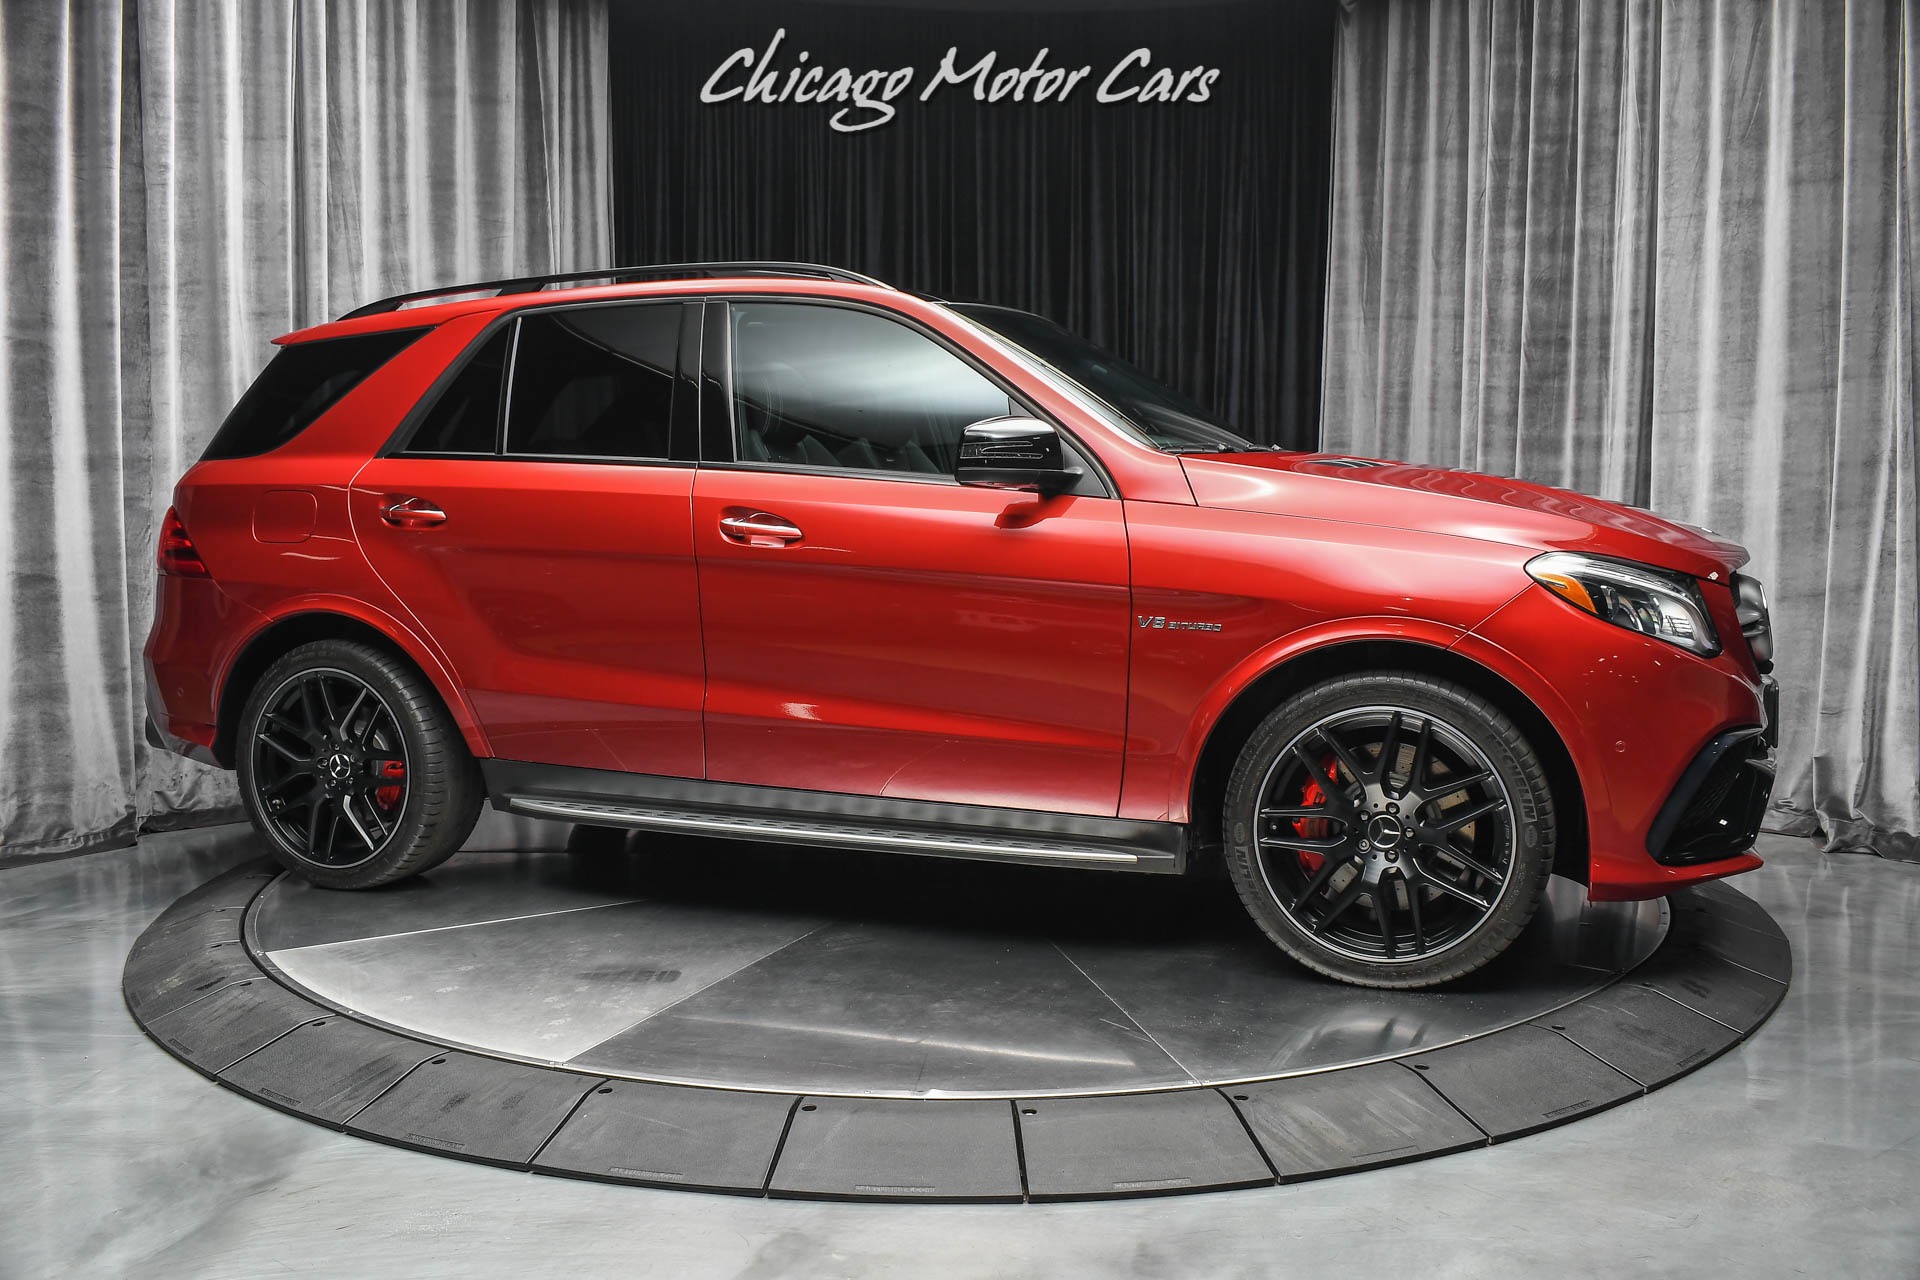 Used-2016-Mercedes-Benz-GLE63-S-AMG-4-Matic-SUV-MSRP-114430-designo-Cardinal-Red-Metallic-LOADED